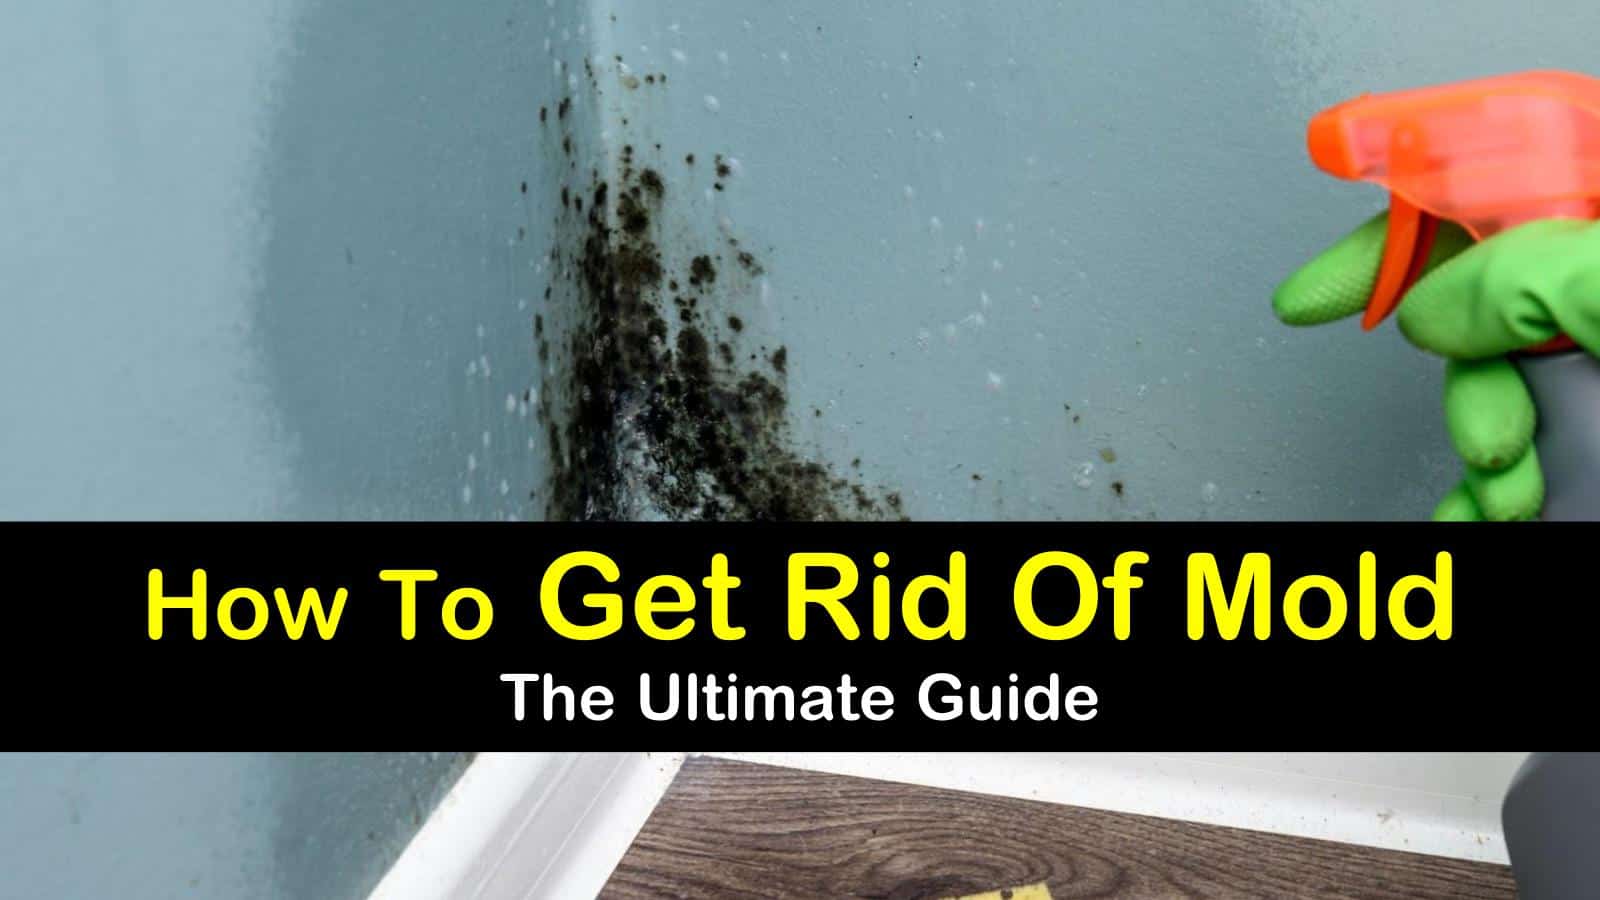 How to Get Rid of Mold